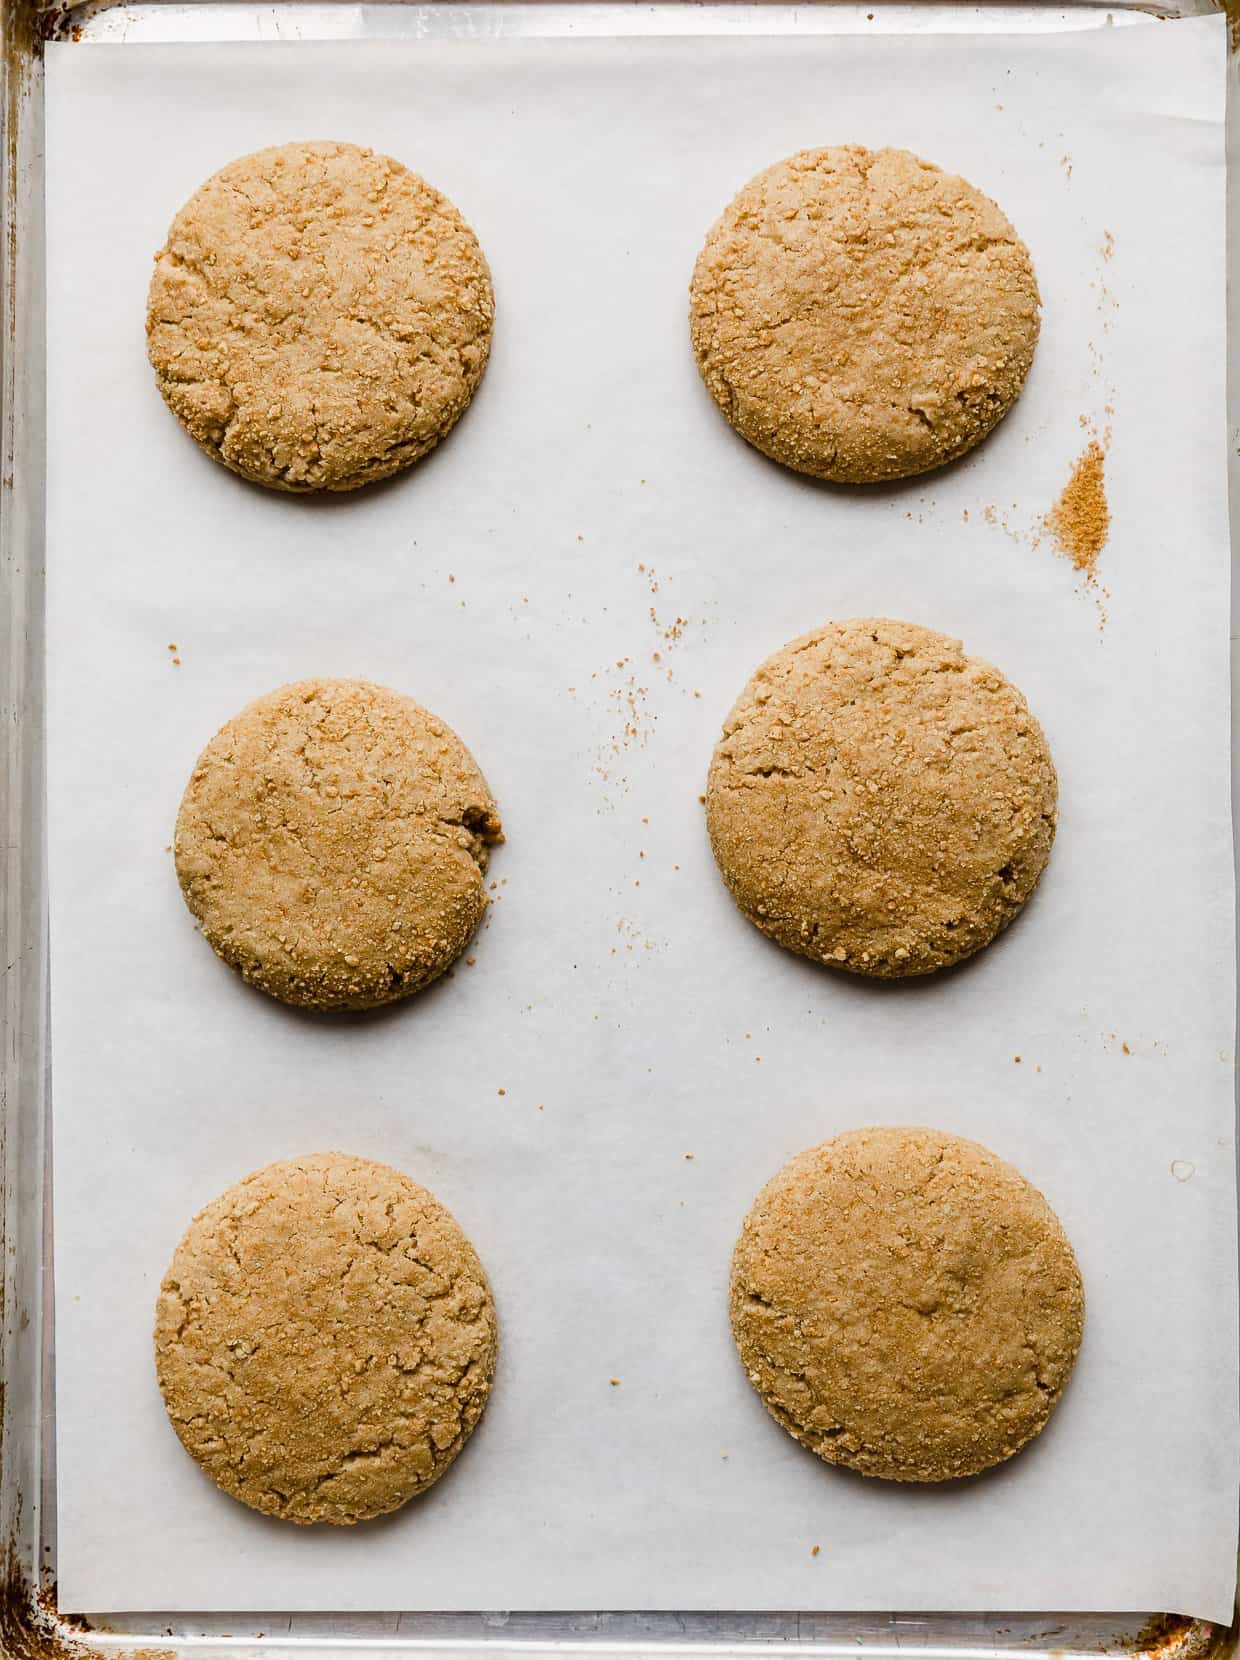 Six baked graham cracker cookies on a white parchment paper lined baking sheet.